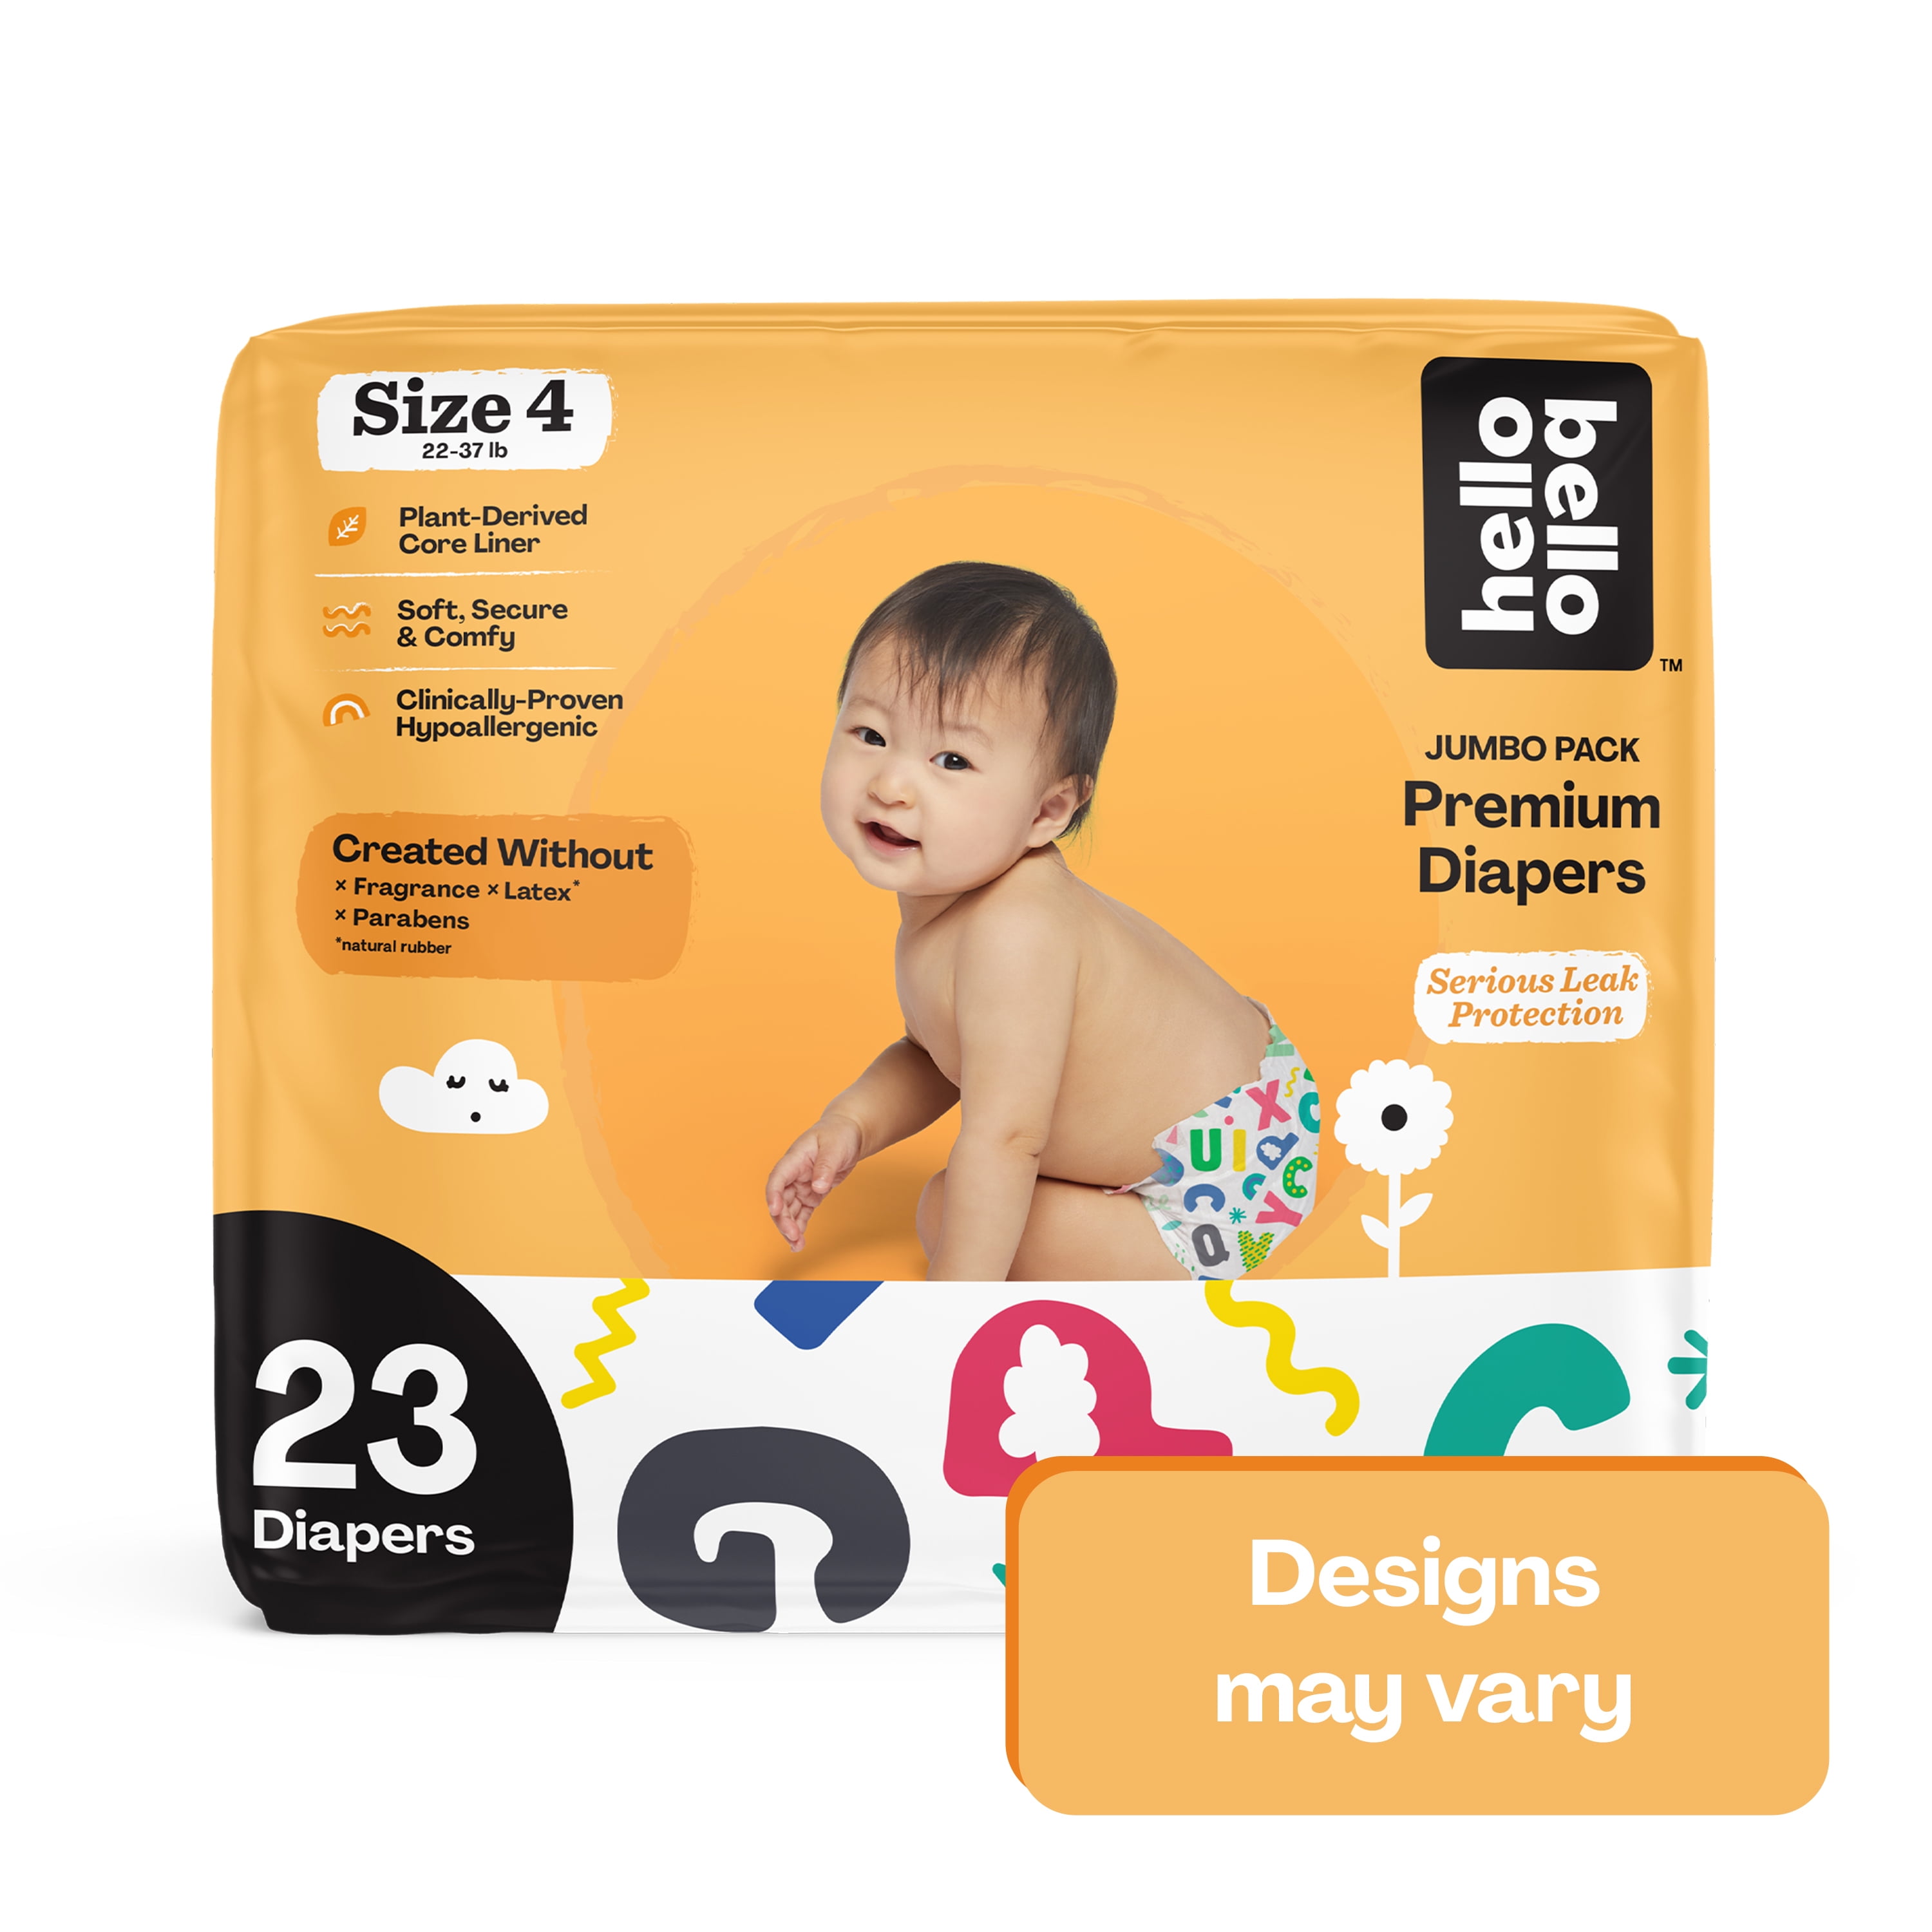 Ultra Absorbent & Hypoallergenic for Overnight Protection Hello Bello Nighttime Baby Diapers ‐ Size 4 4 Packs of 21 84 Count 